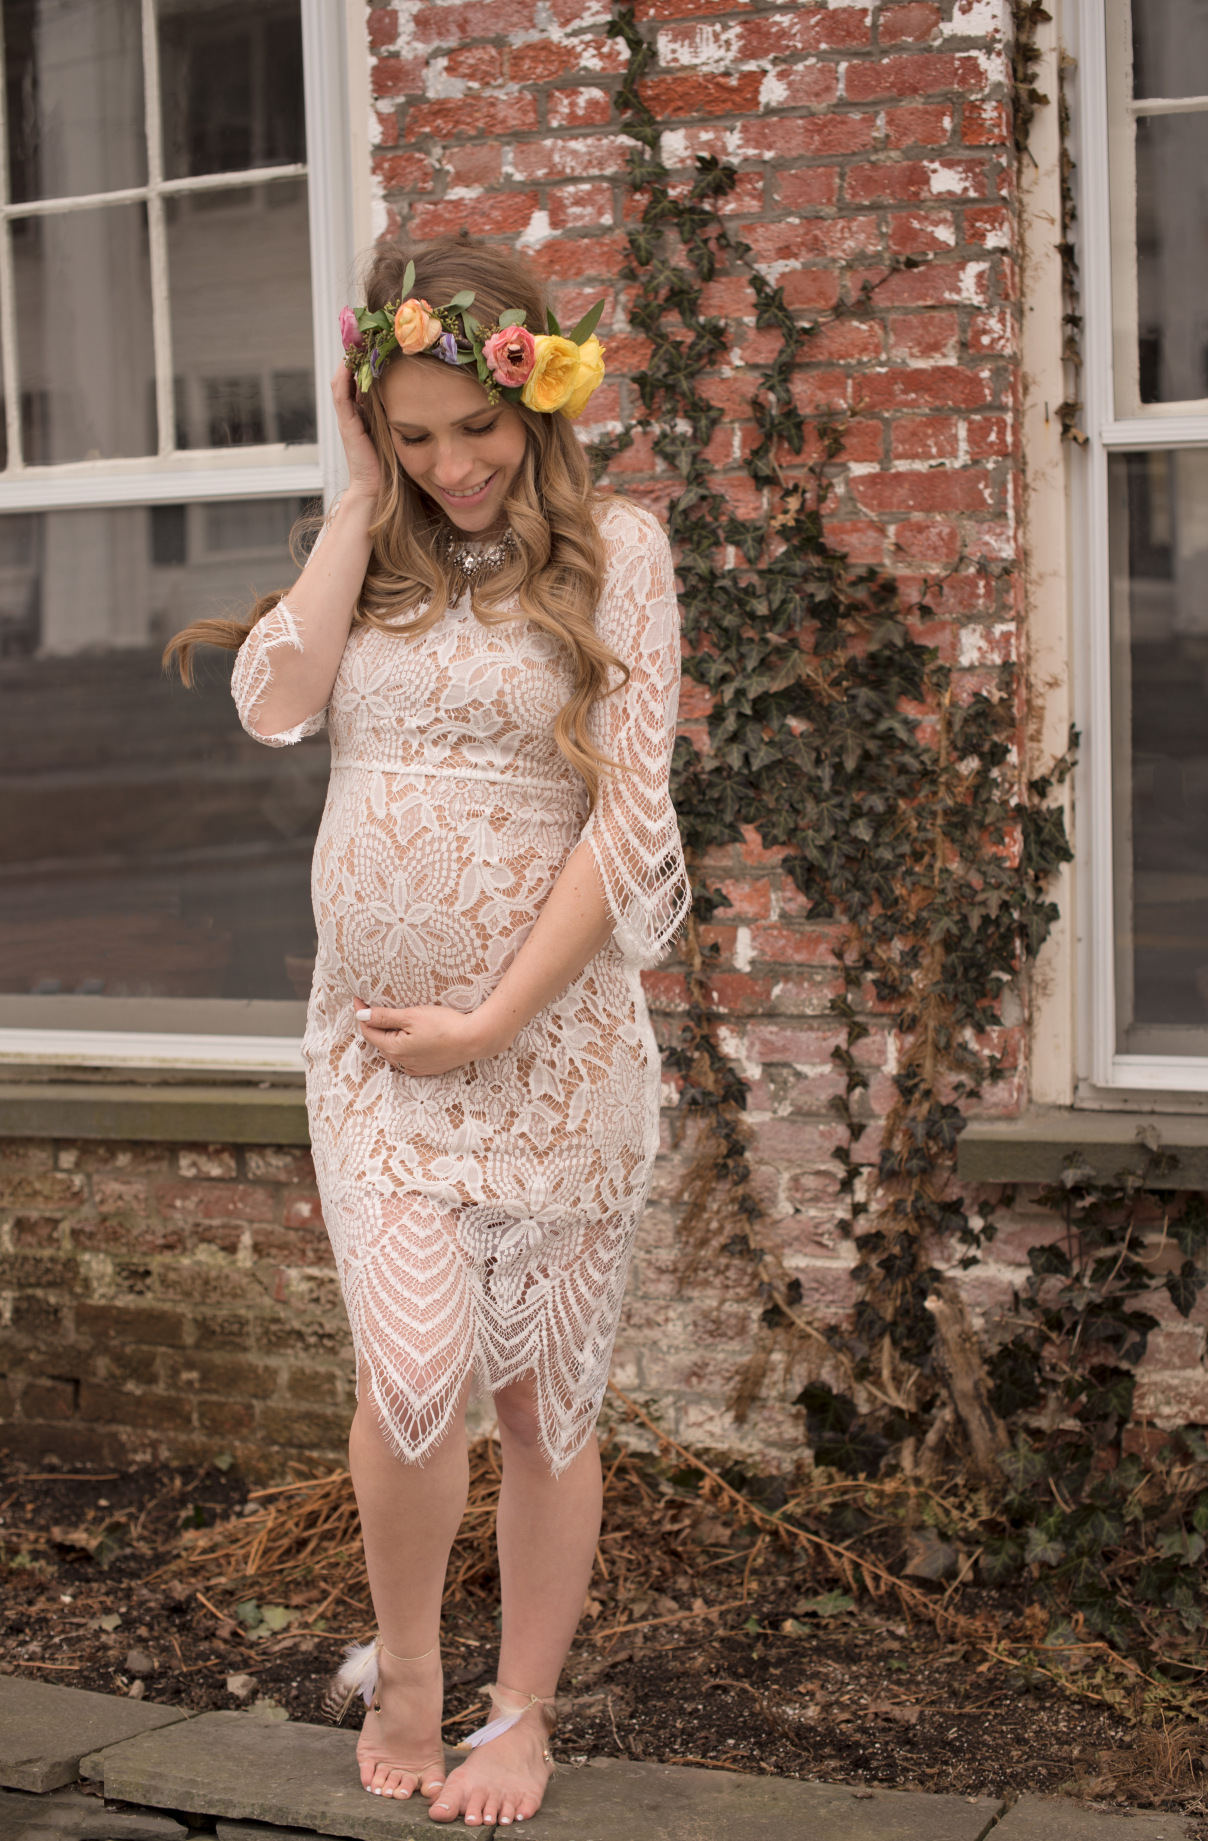 Full Size of Baby Shower:sturdy Stylish Maternity Dresses For Baby Shower Picture Ideas Stylish Maternity Dresses For Baby Shower As Well As Baby Shower Gift Message With Practical Baby Shower Gifts Plus Baby Shower Cards For Boy Together With Baby Shower Cake Designs